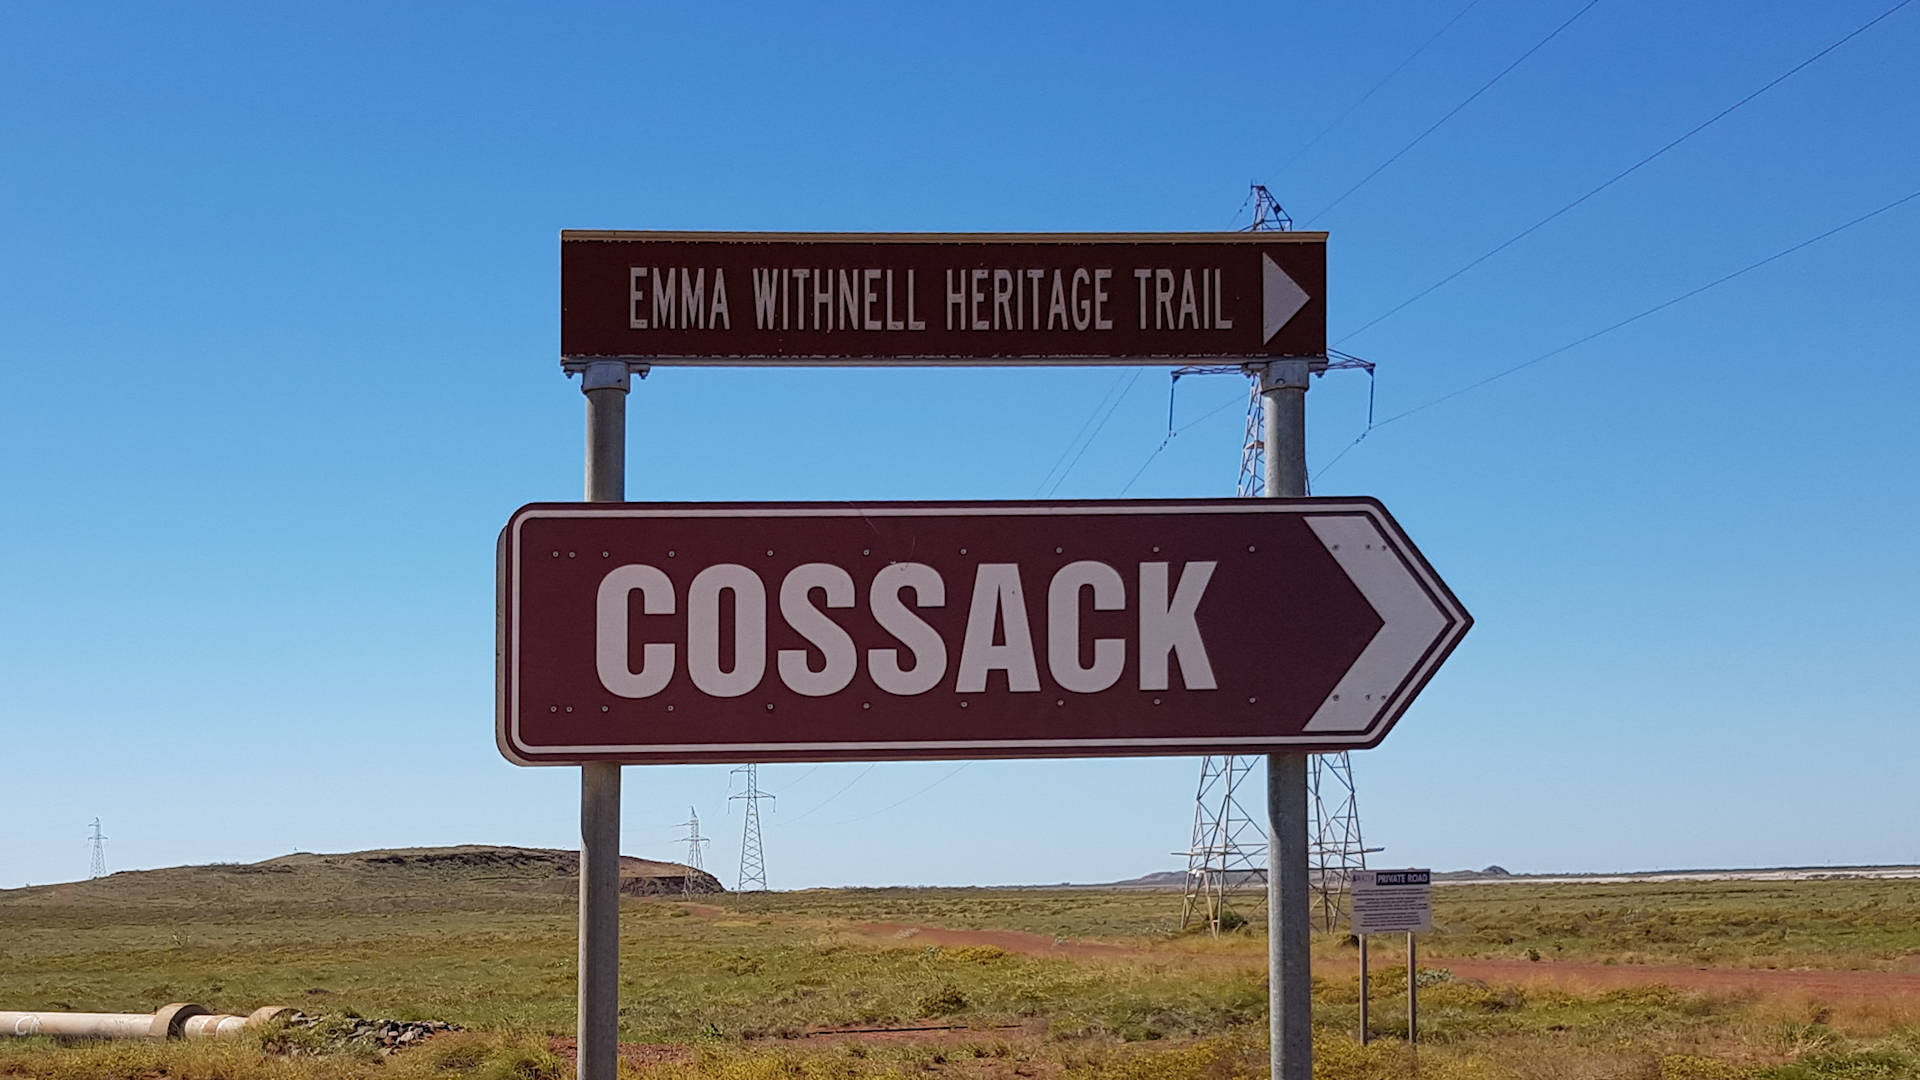 Emma Withnell Historical Trail sign and Cossack sign